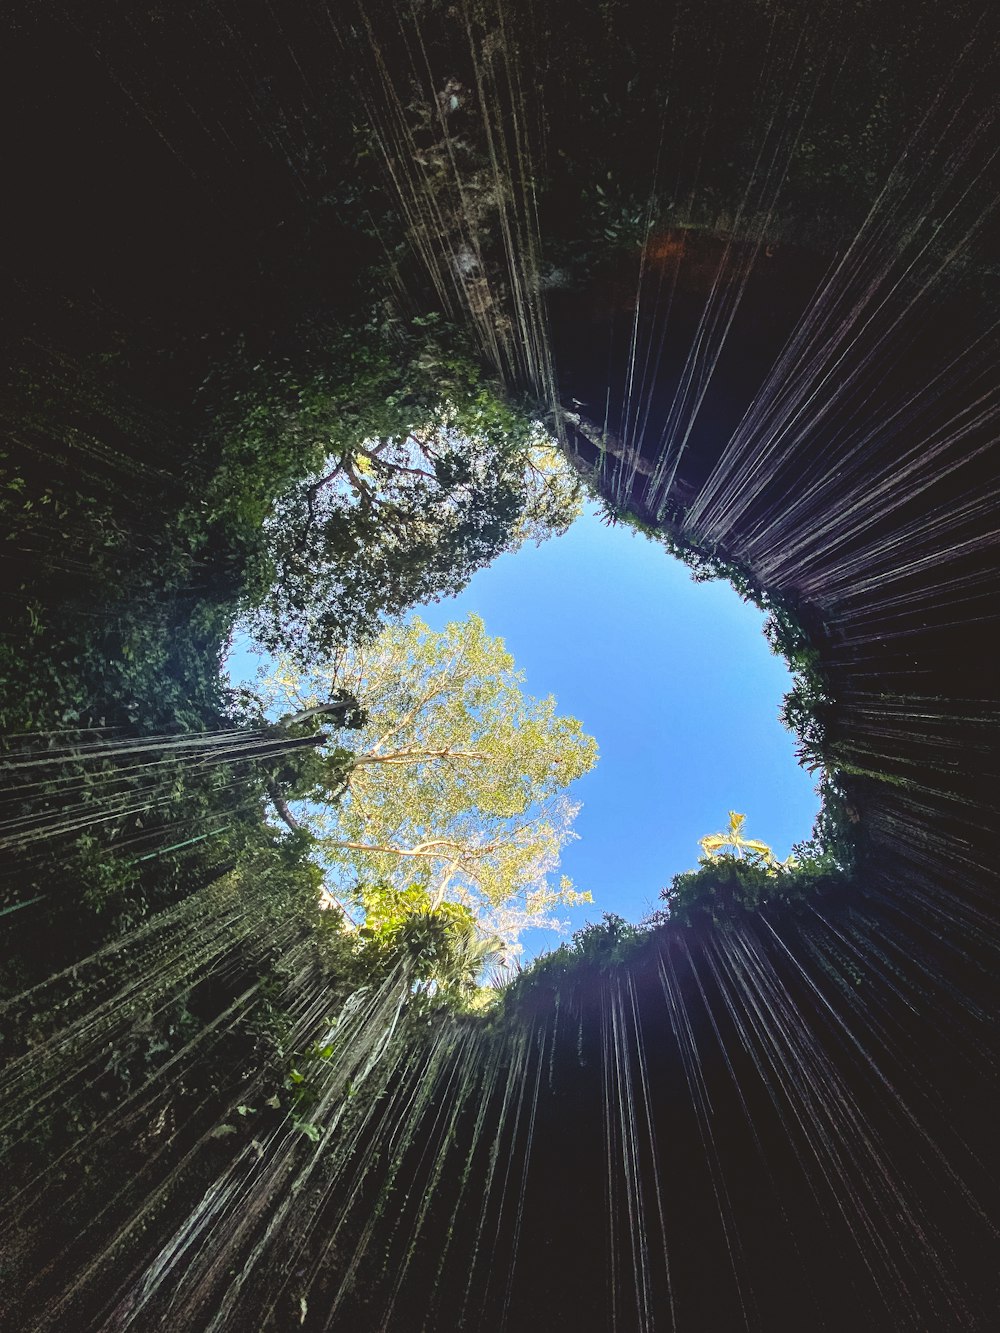 a view of the sky from the ground of a forest